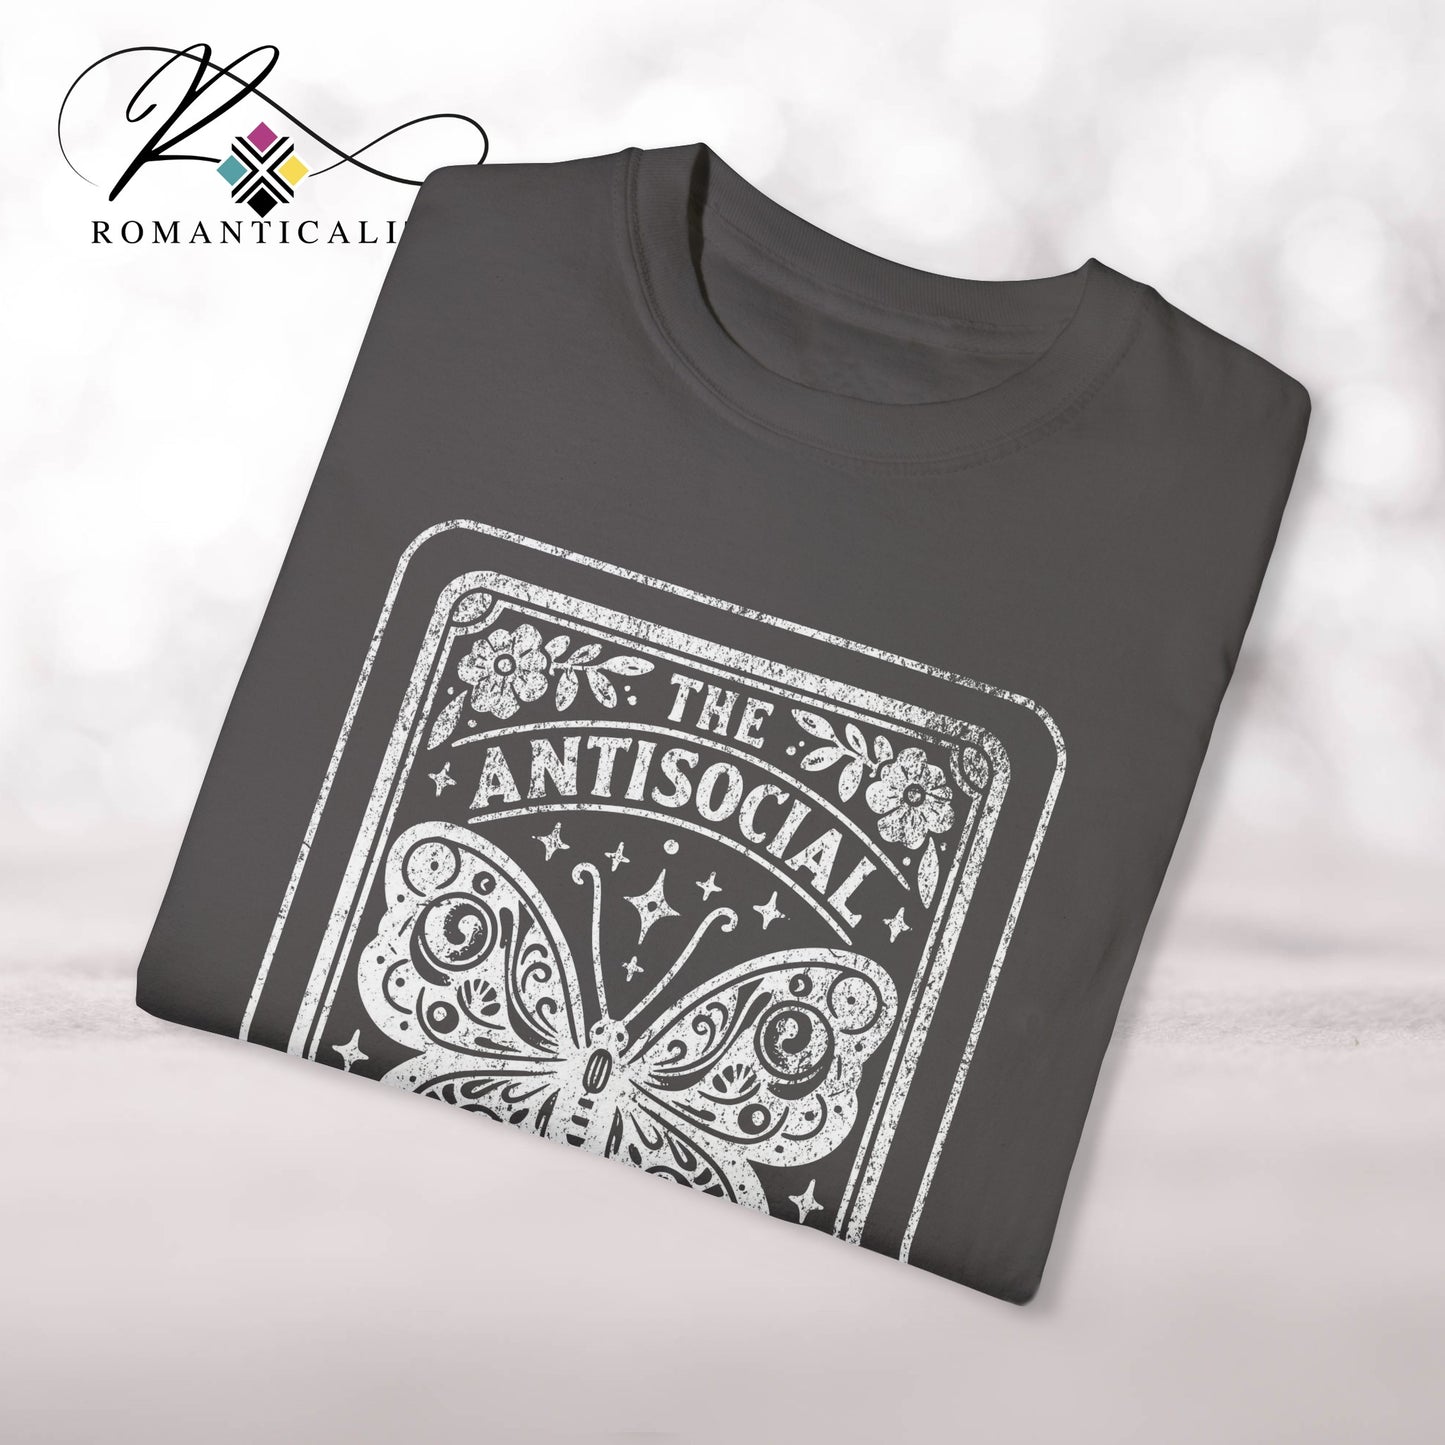 ANTISOCIAL BUTTERFLY Tarot Graphic T-Shirt-Humorous Tee-Comfort Colors Graphic Tee-Unisex Graphic Tee-Tarot Card Graphic T-shirt-Giftful-Gift-Mother's Day